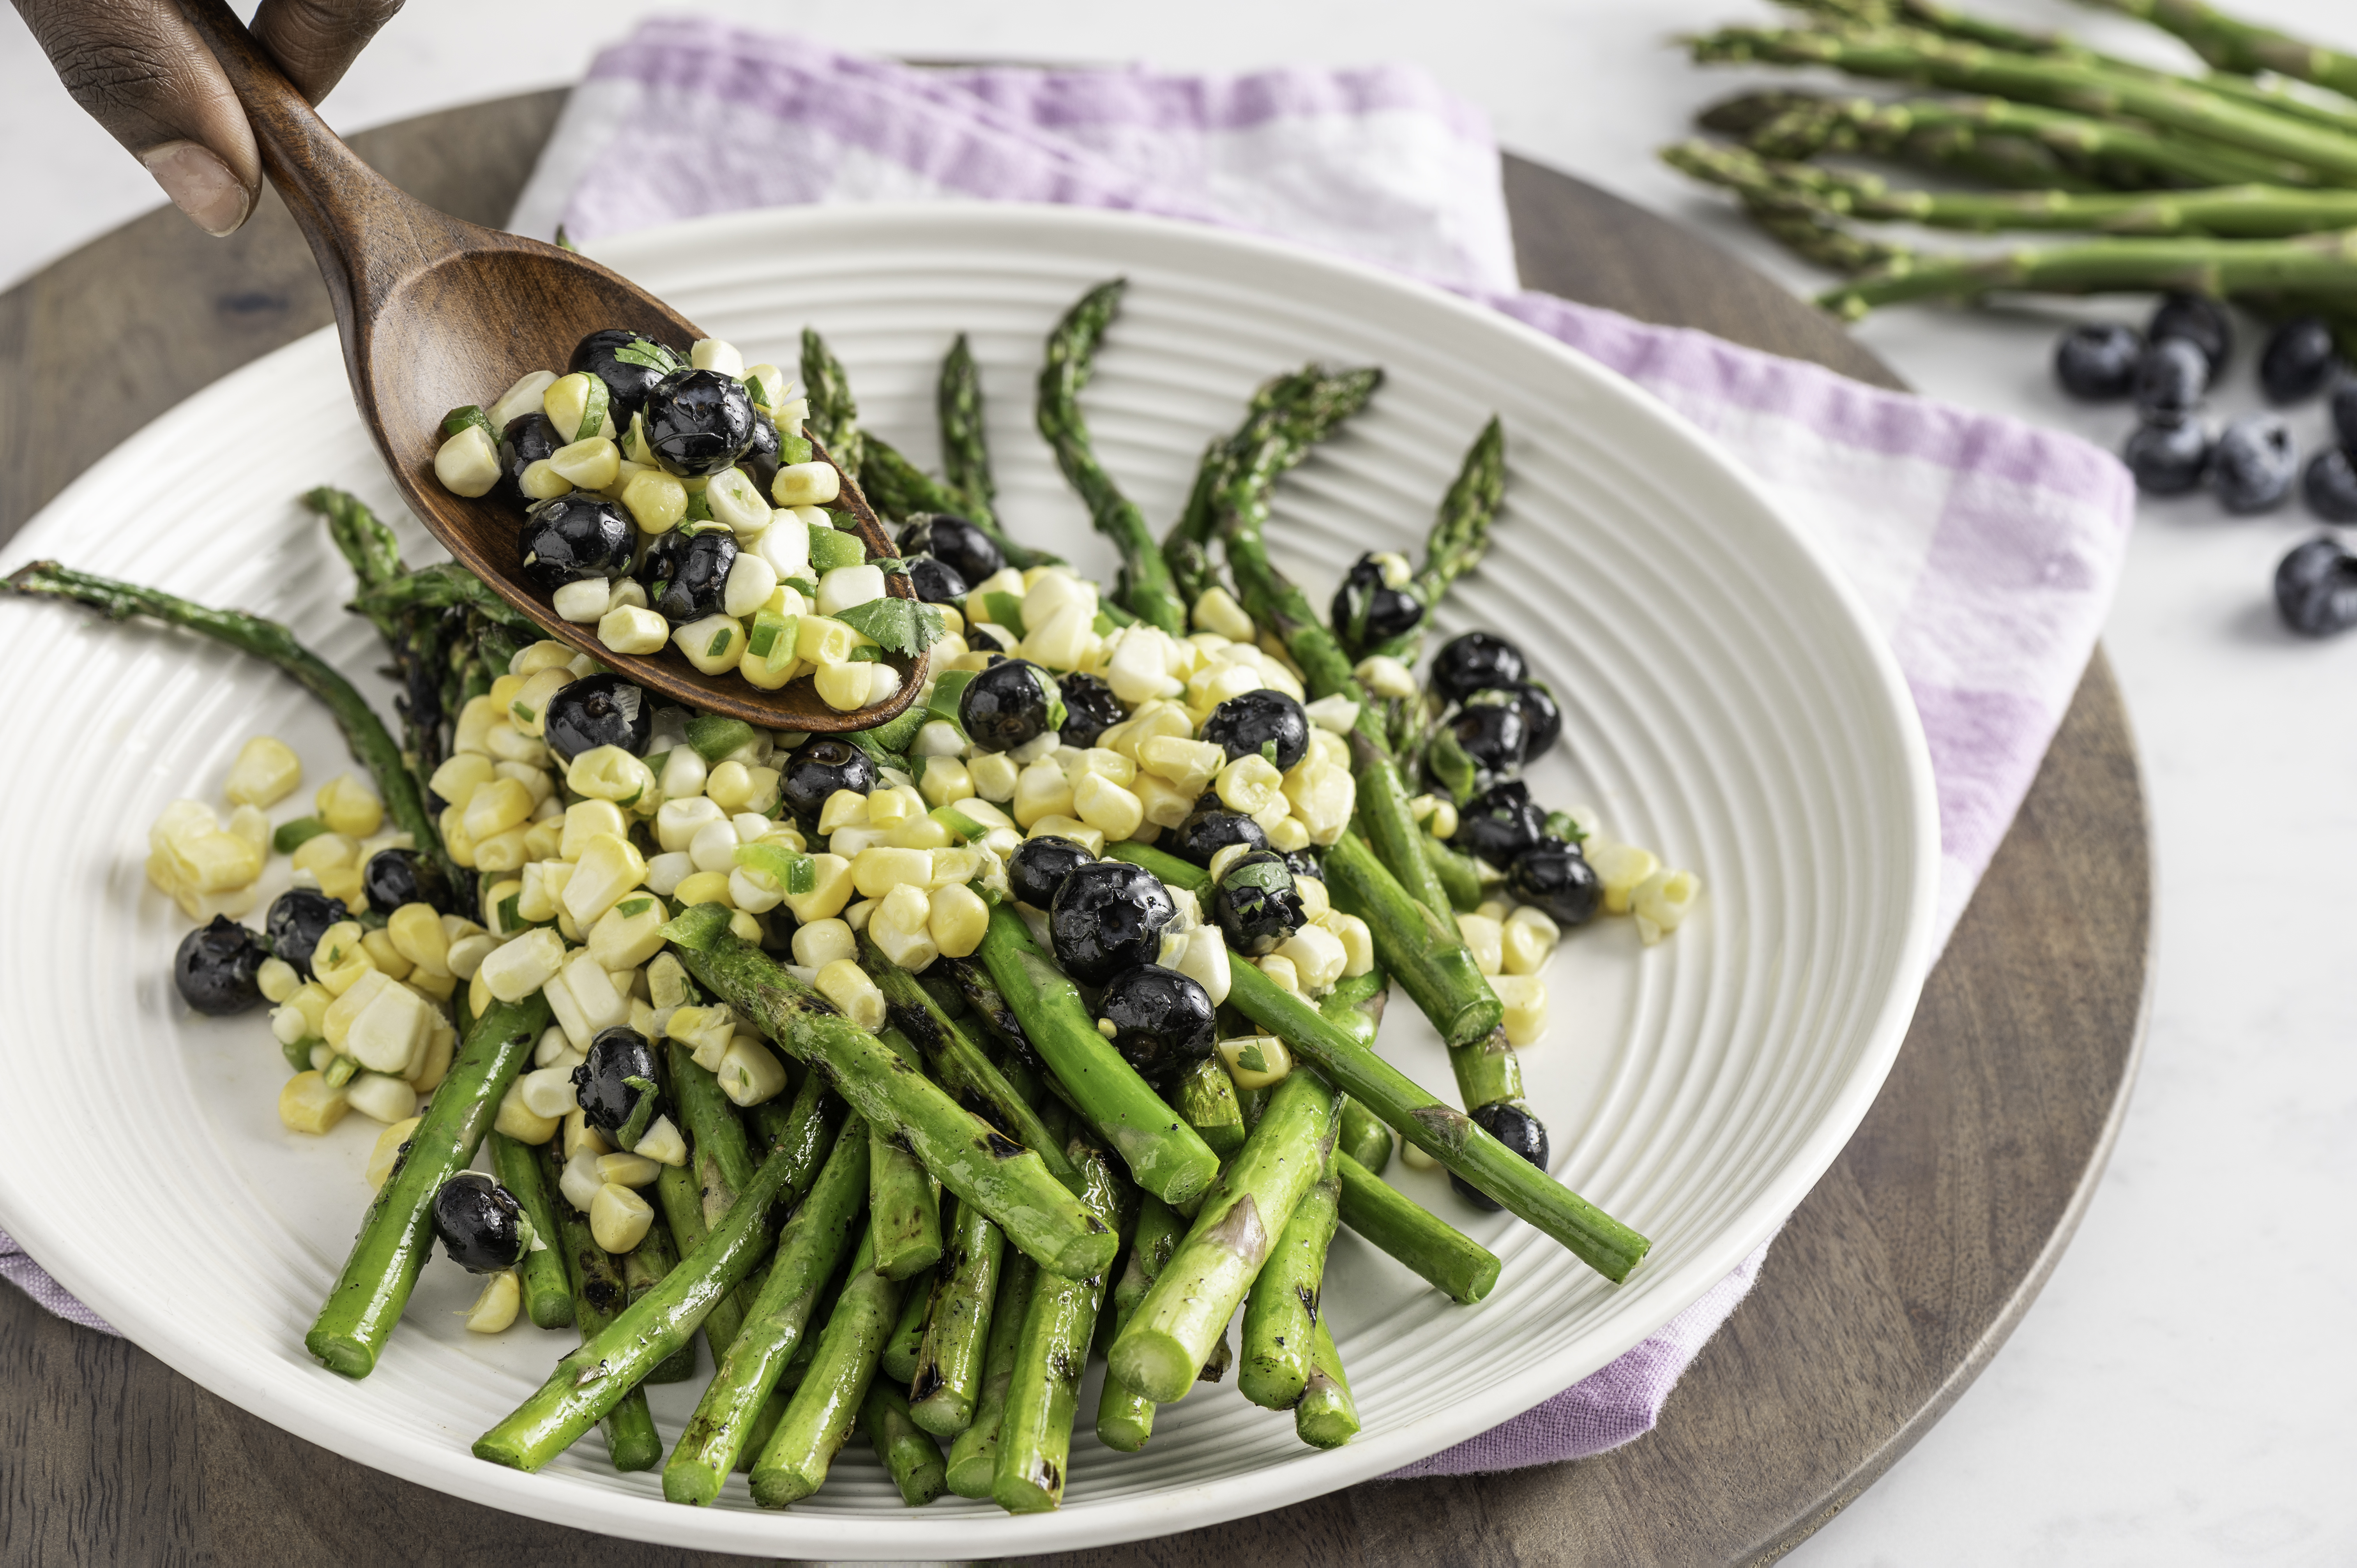 Grilled Asparagus with Blueberry Corn Relish